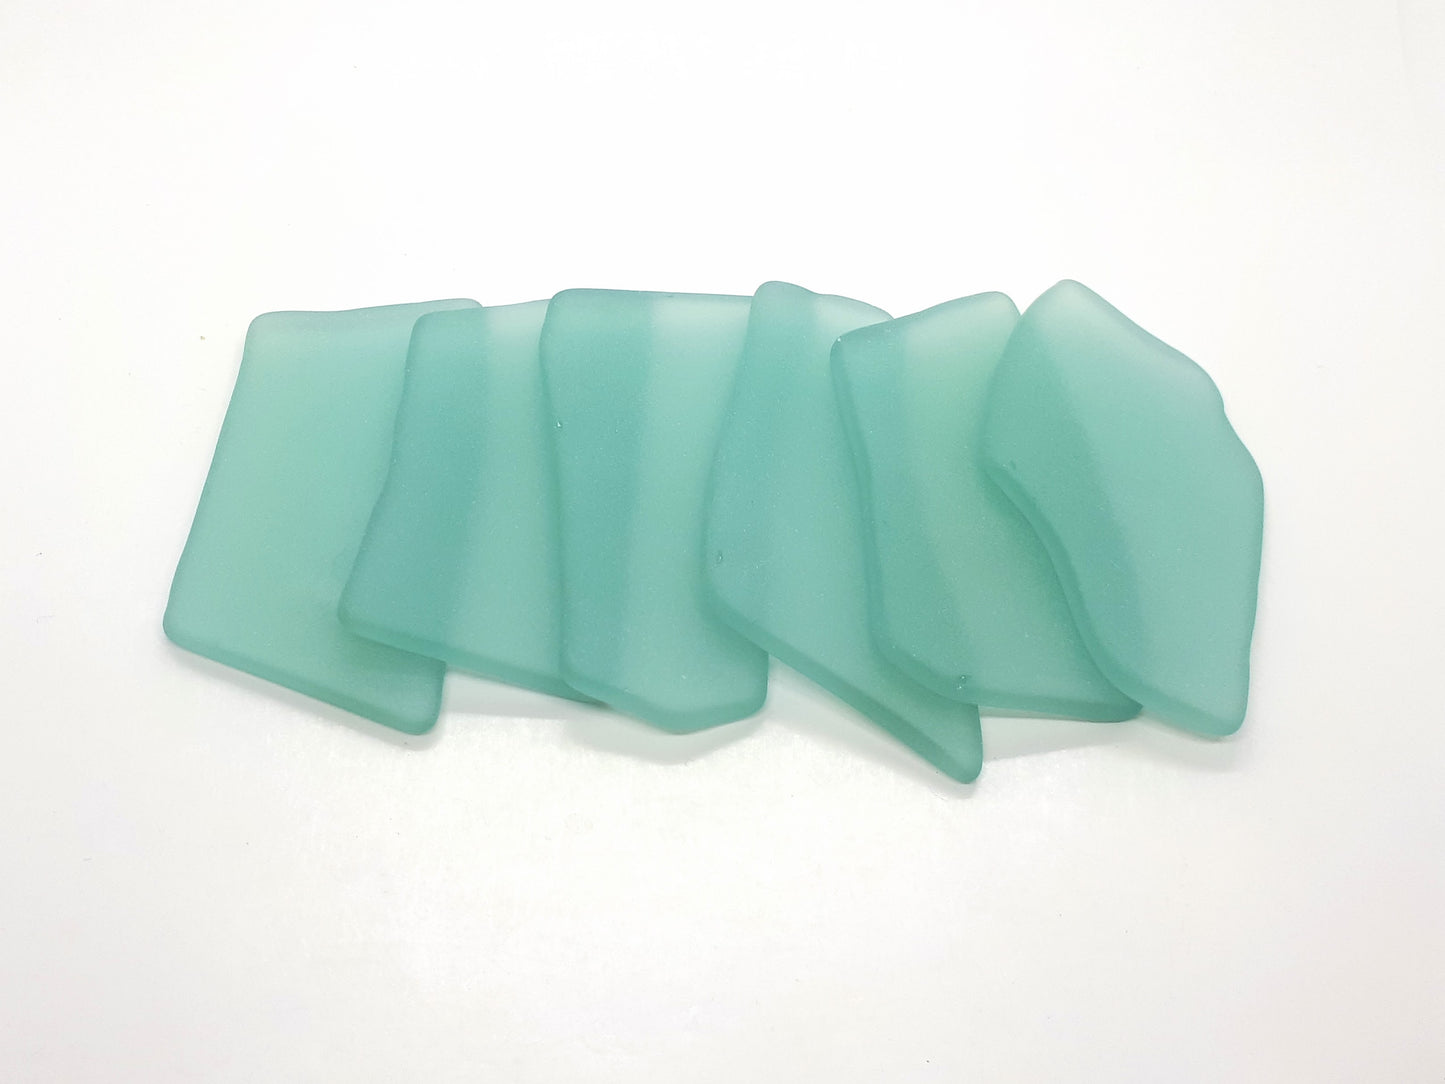 Sea green shades - Sea glass place cards - Set of 20 - Irregular shaped pieces